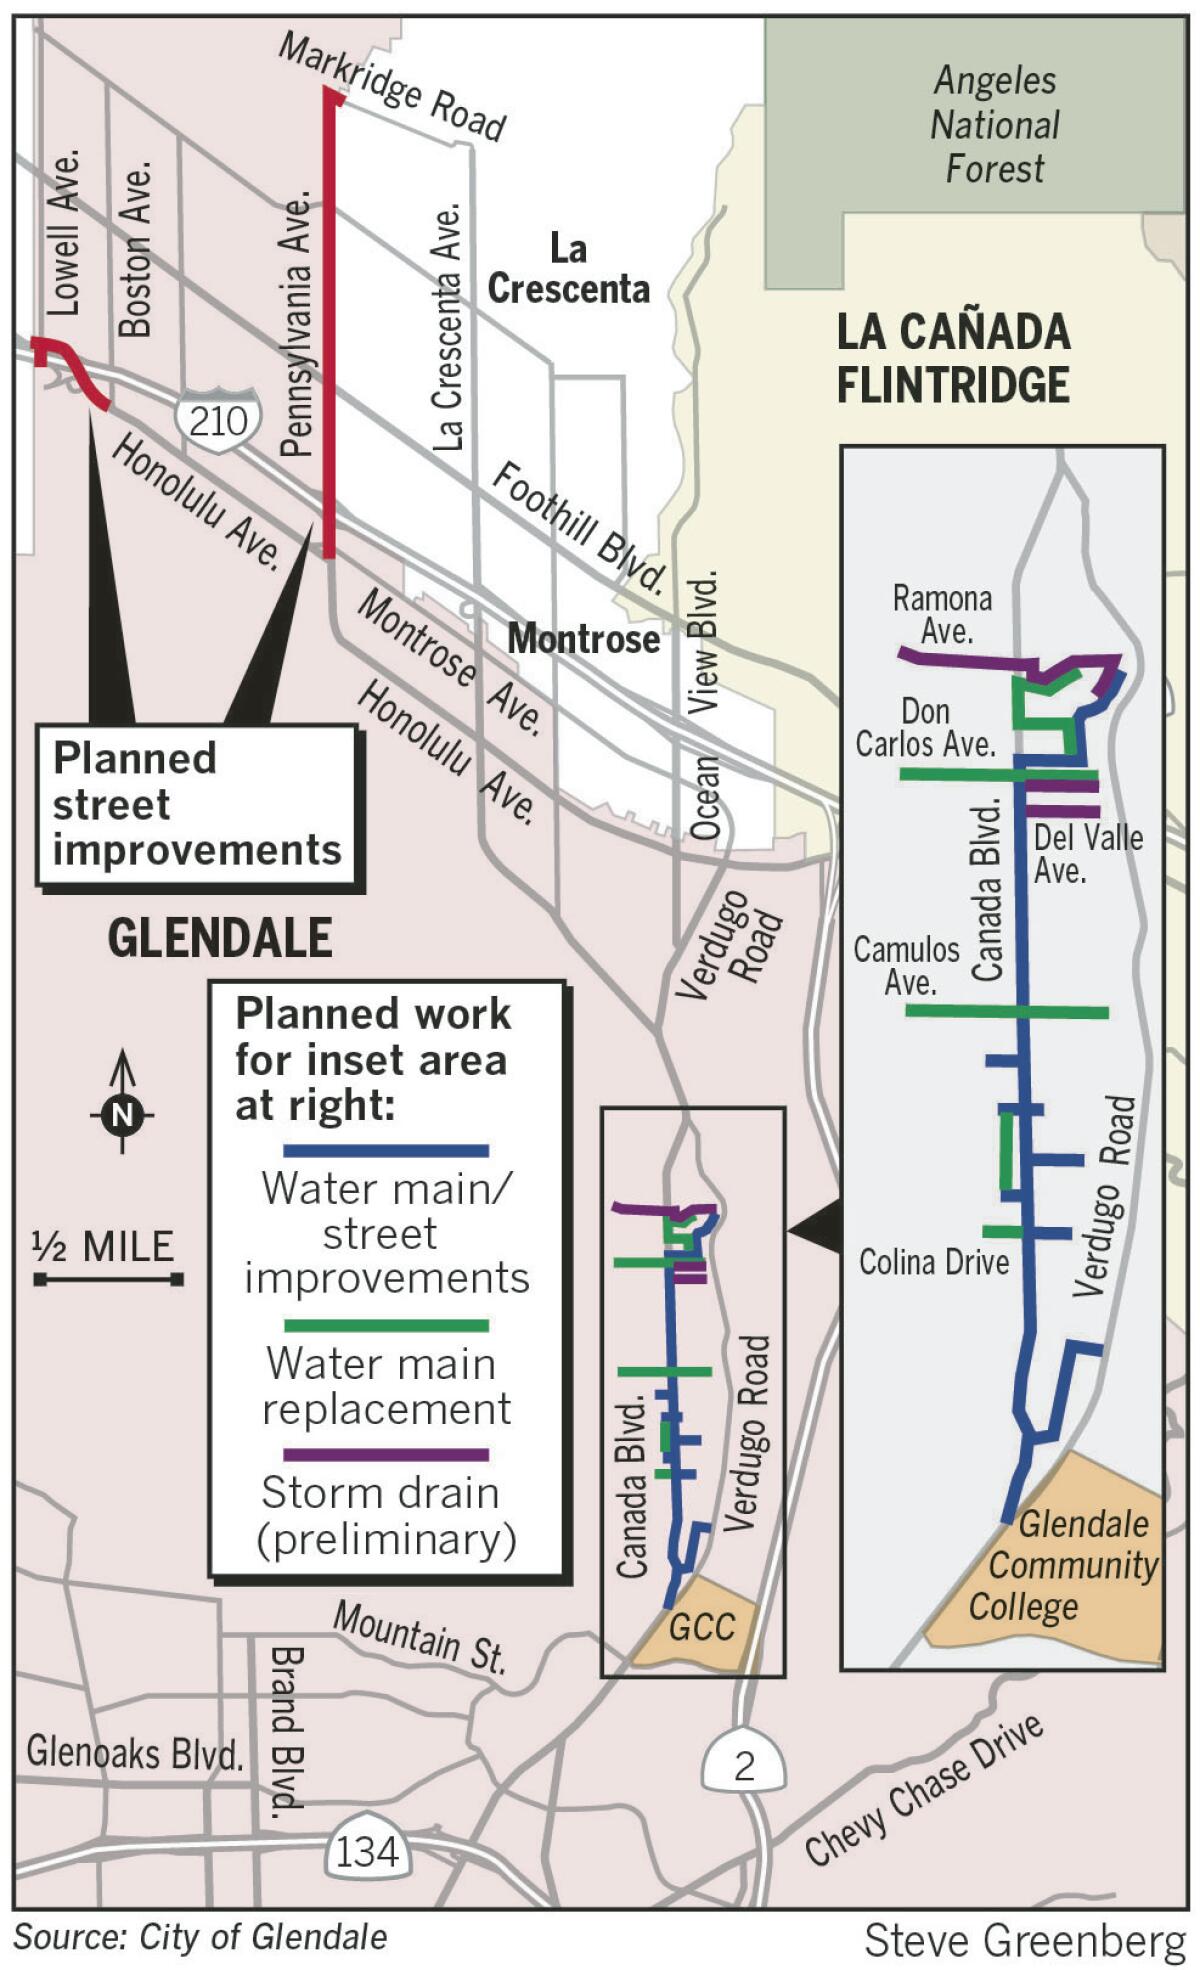 Glendale officials approved a roughly $10.2 million contract that will allow street and water-main improvements to begin in the northern part of the city, shown on the map.